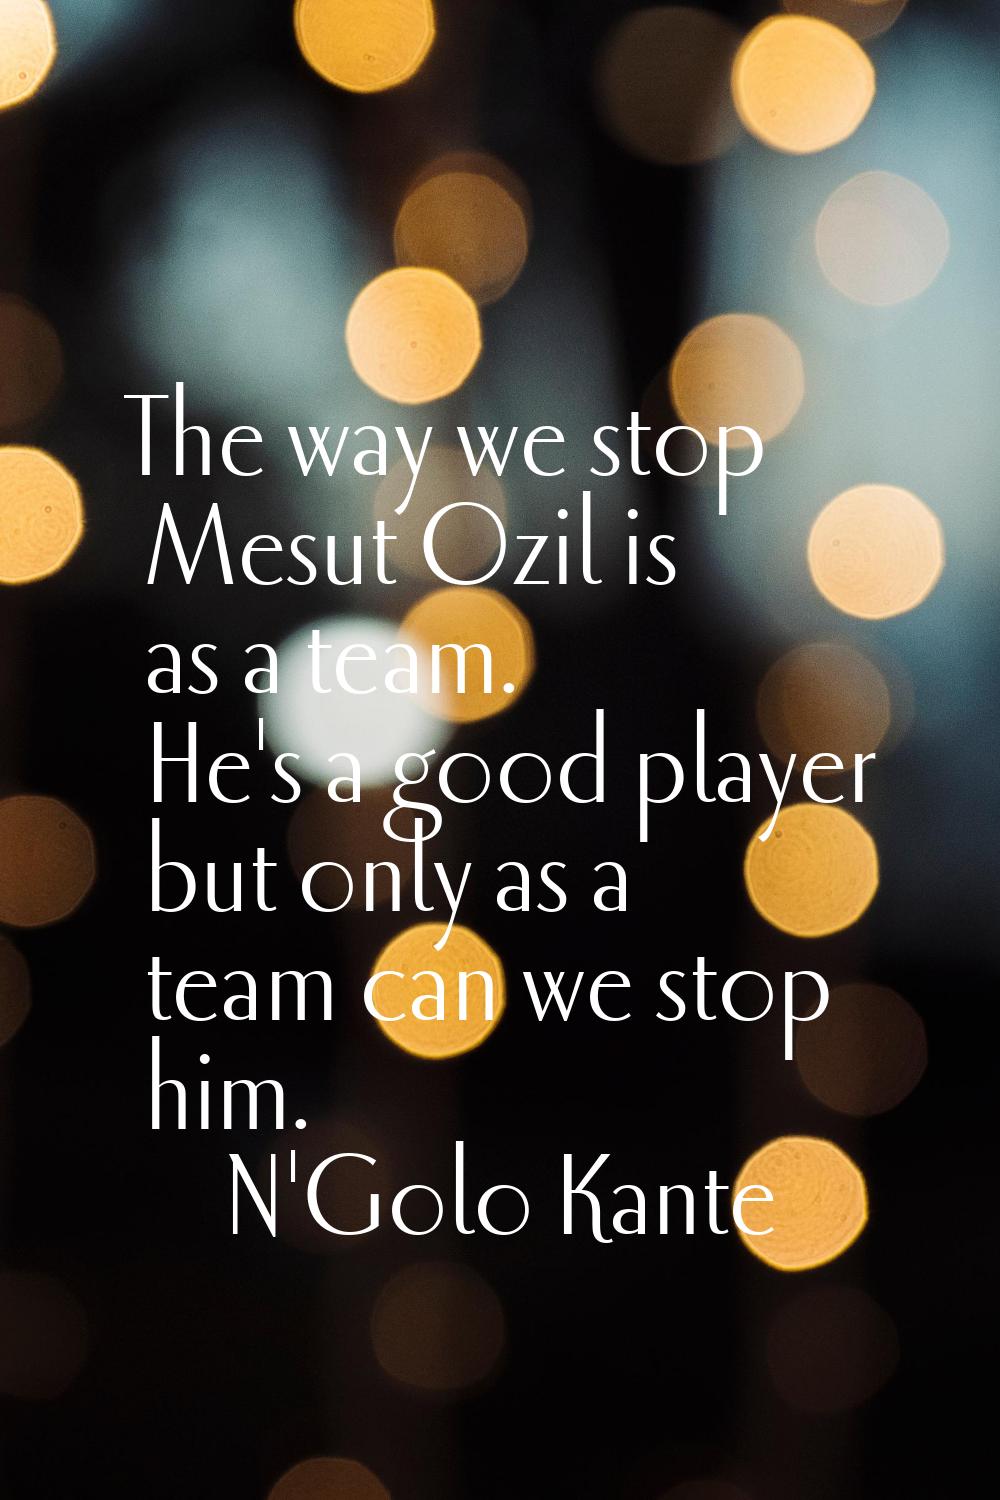 The way we stop Mesut Ozil is as a team. He's a good player but only as a team can we stop him.